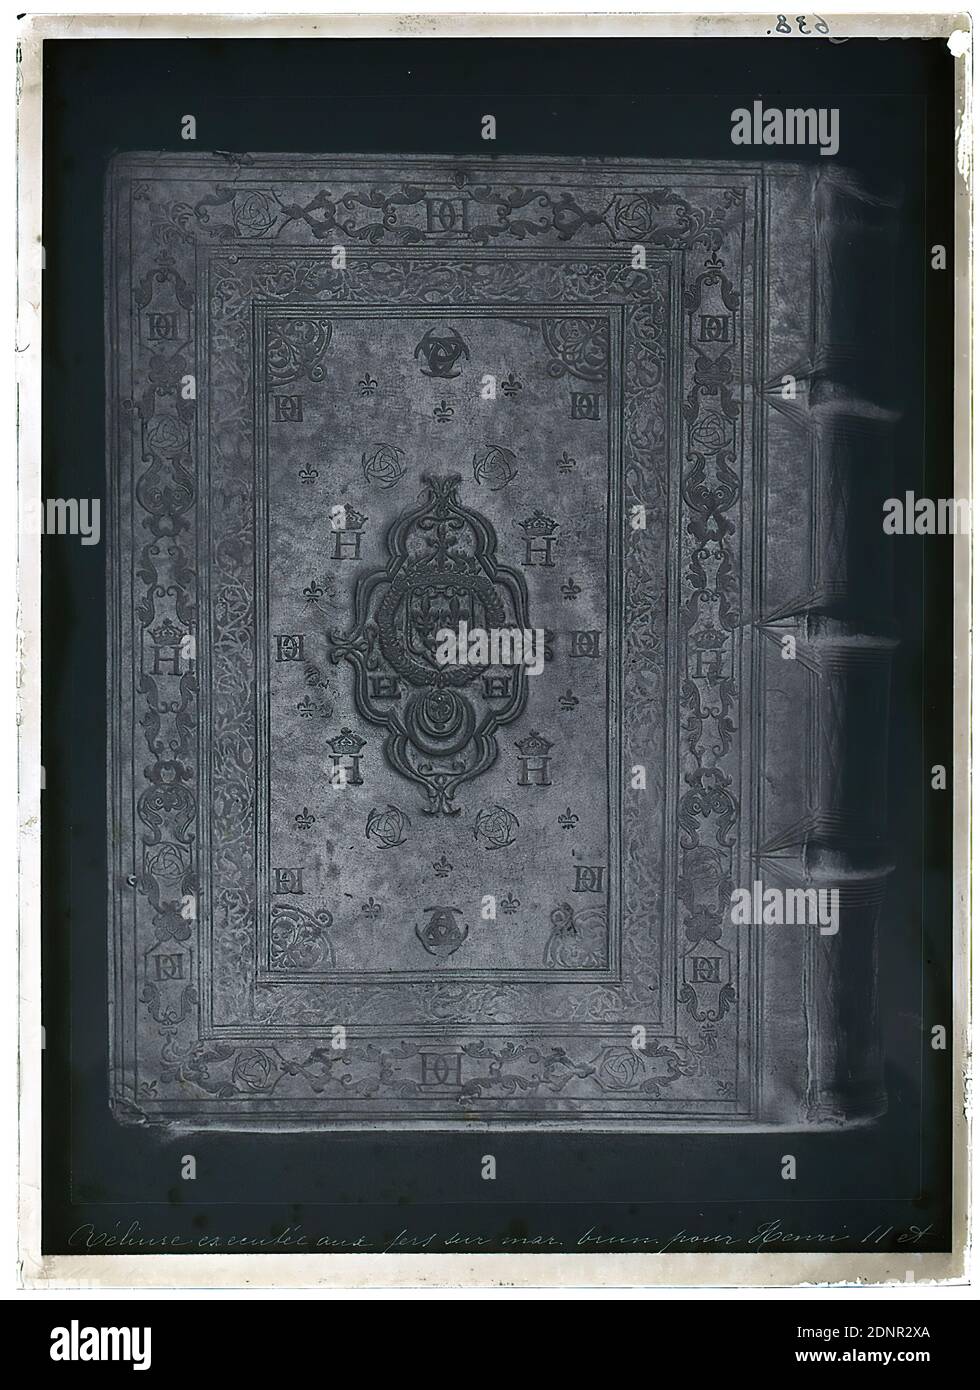 Wilhelm Weimar, book cover, glass negative, black and white negative process, total: height: 23.8 cm; width: 17.8 cm, numbered: top right. : in black ink: 638, factual photography, arts and crafts, industrial design, book, Weimar recognizes the historical value of early photographic processes and begins collecting daguerreotypes for the museum Stock Photo